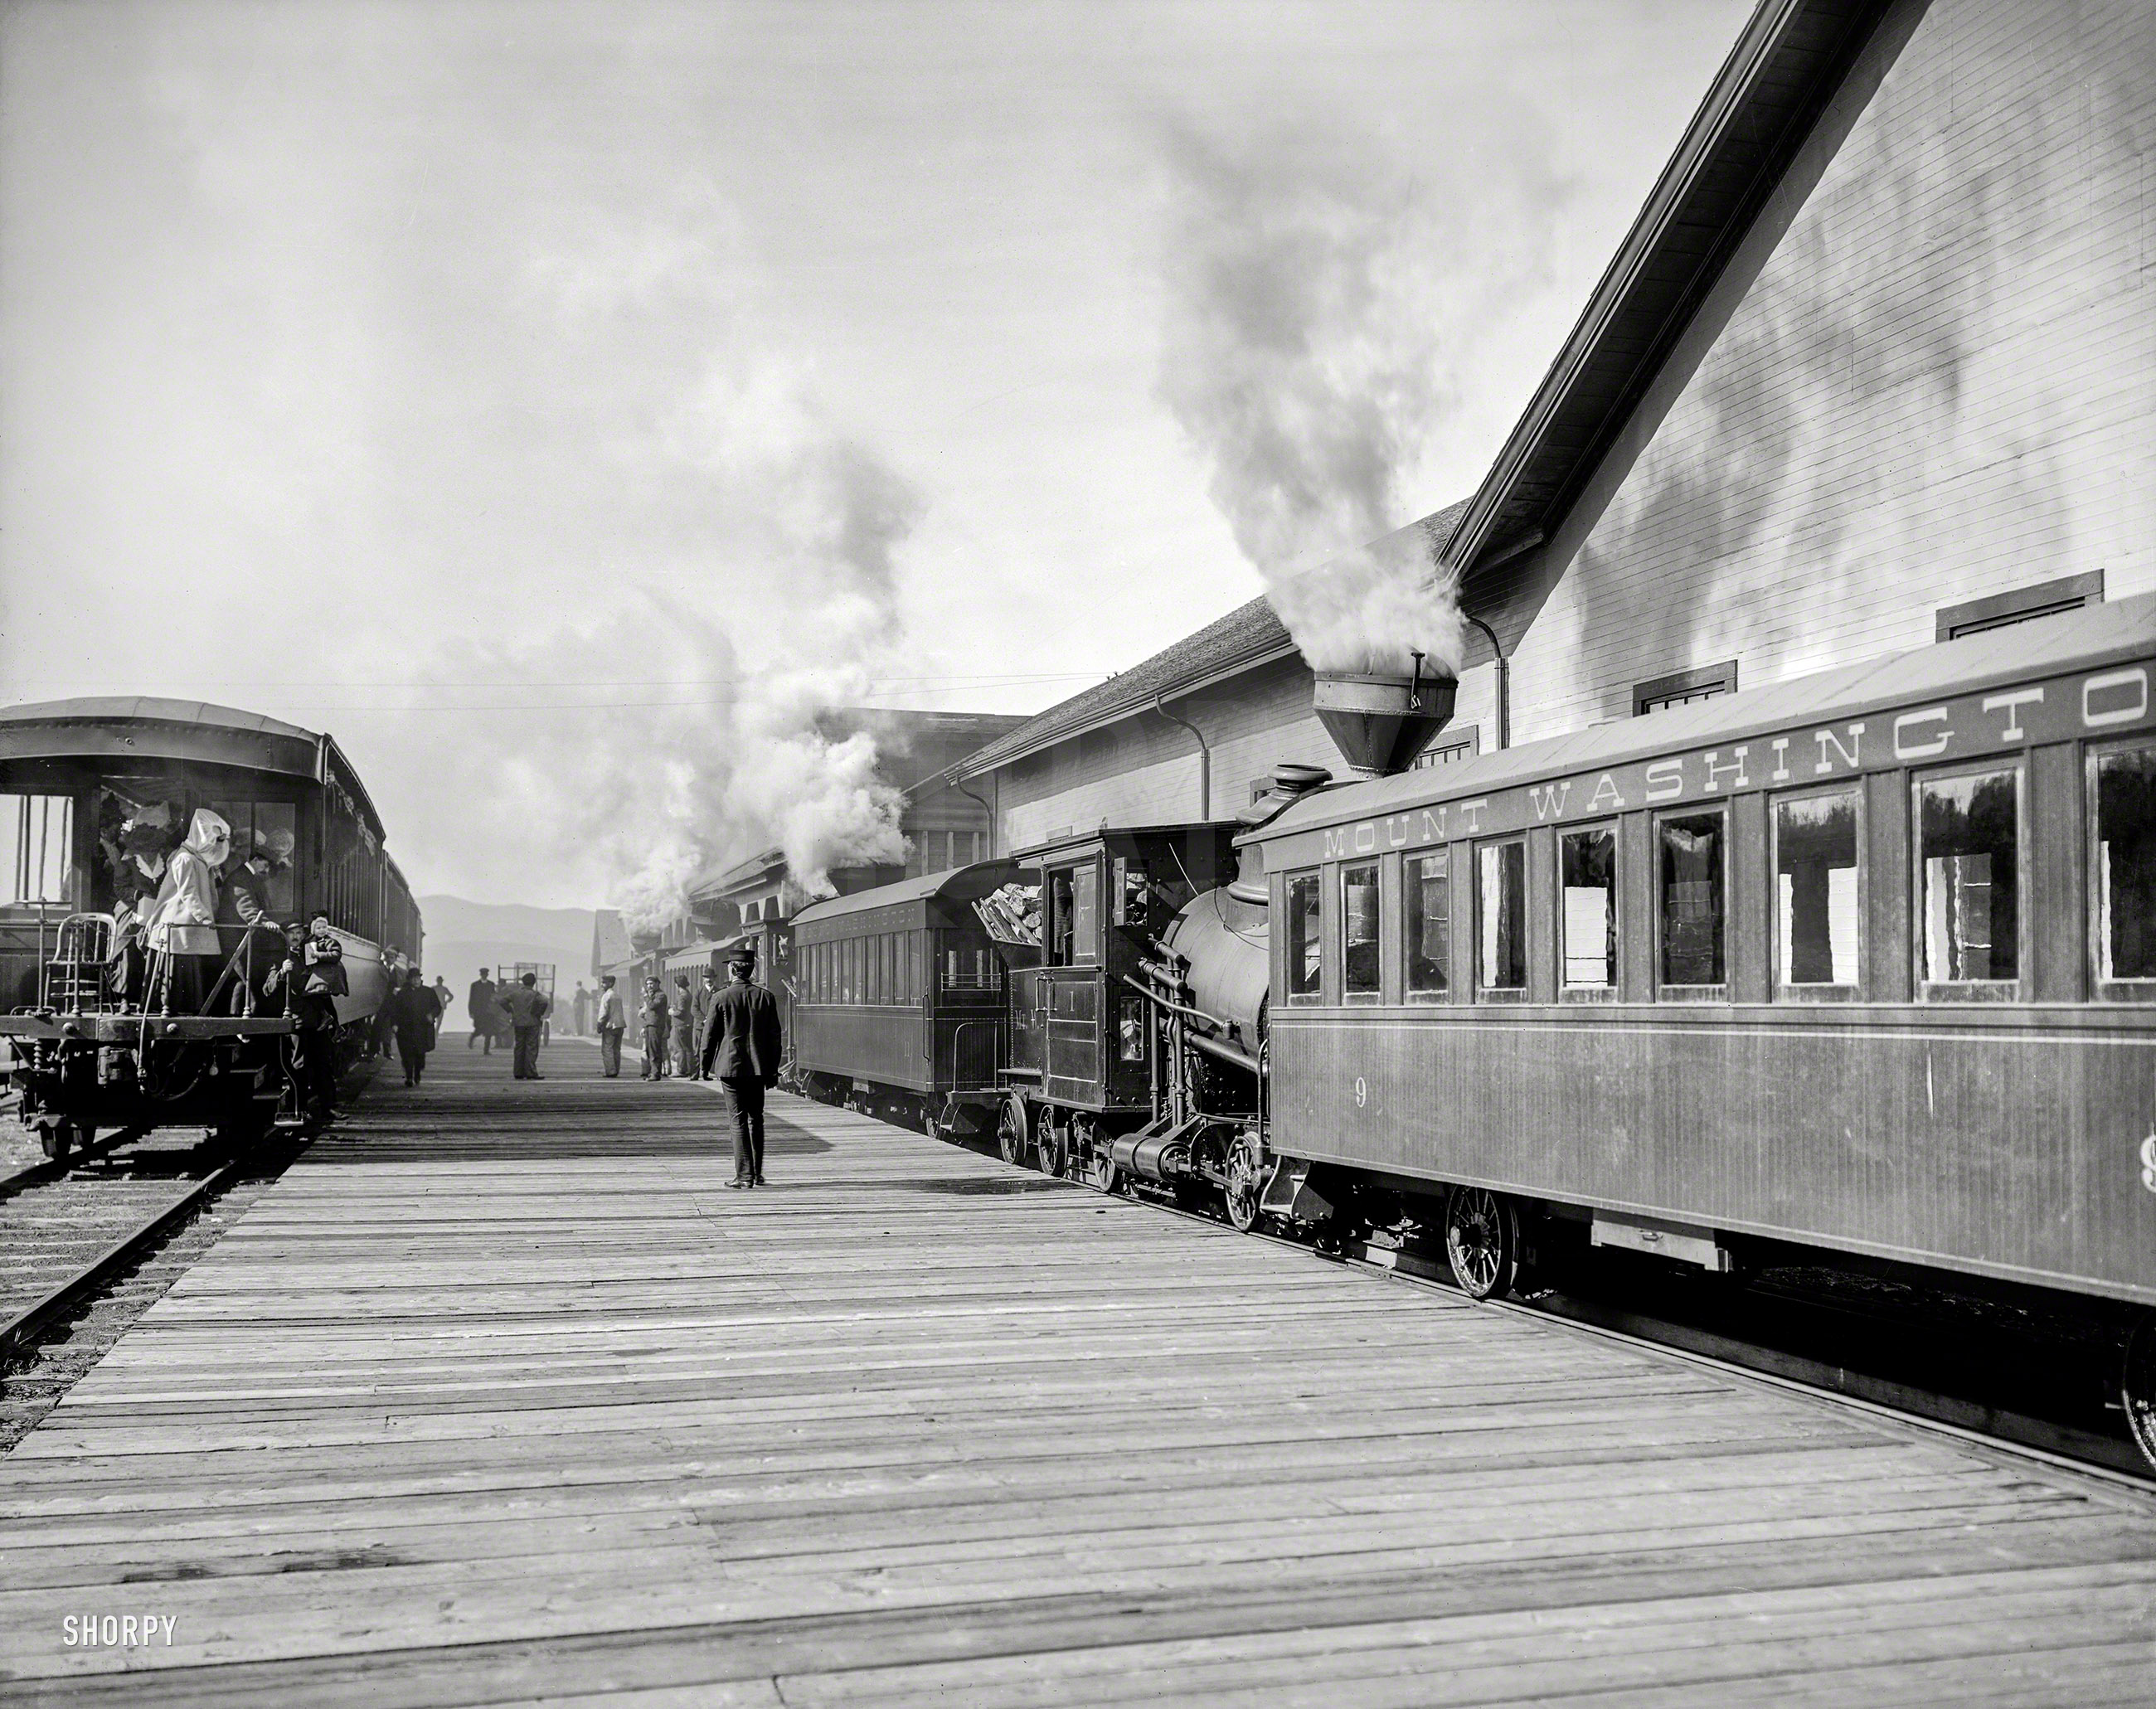 &nbsp; &nbsp; &nbsp; &nbsp; 19th-century cog railway to the highest peak in the Northeast.
New Hampshire circa 1906. "Base station, Mount Washington Railway, White Mountains." 8x10 inch dry plate glass negative. View full size.